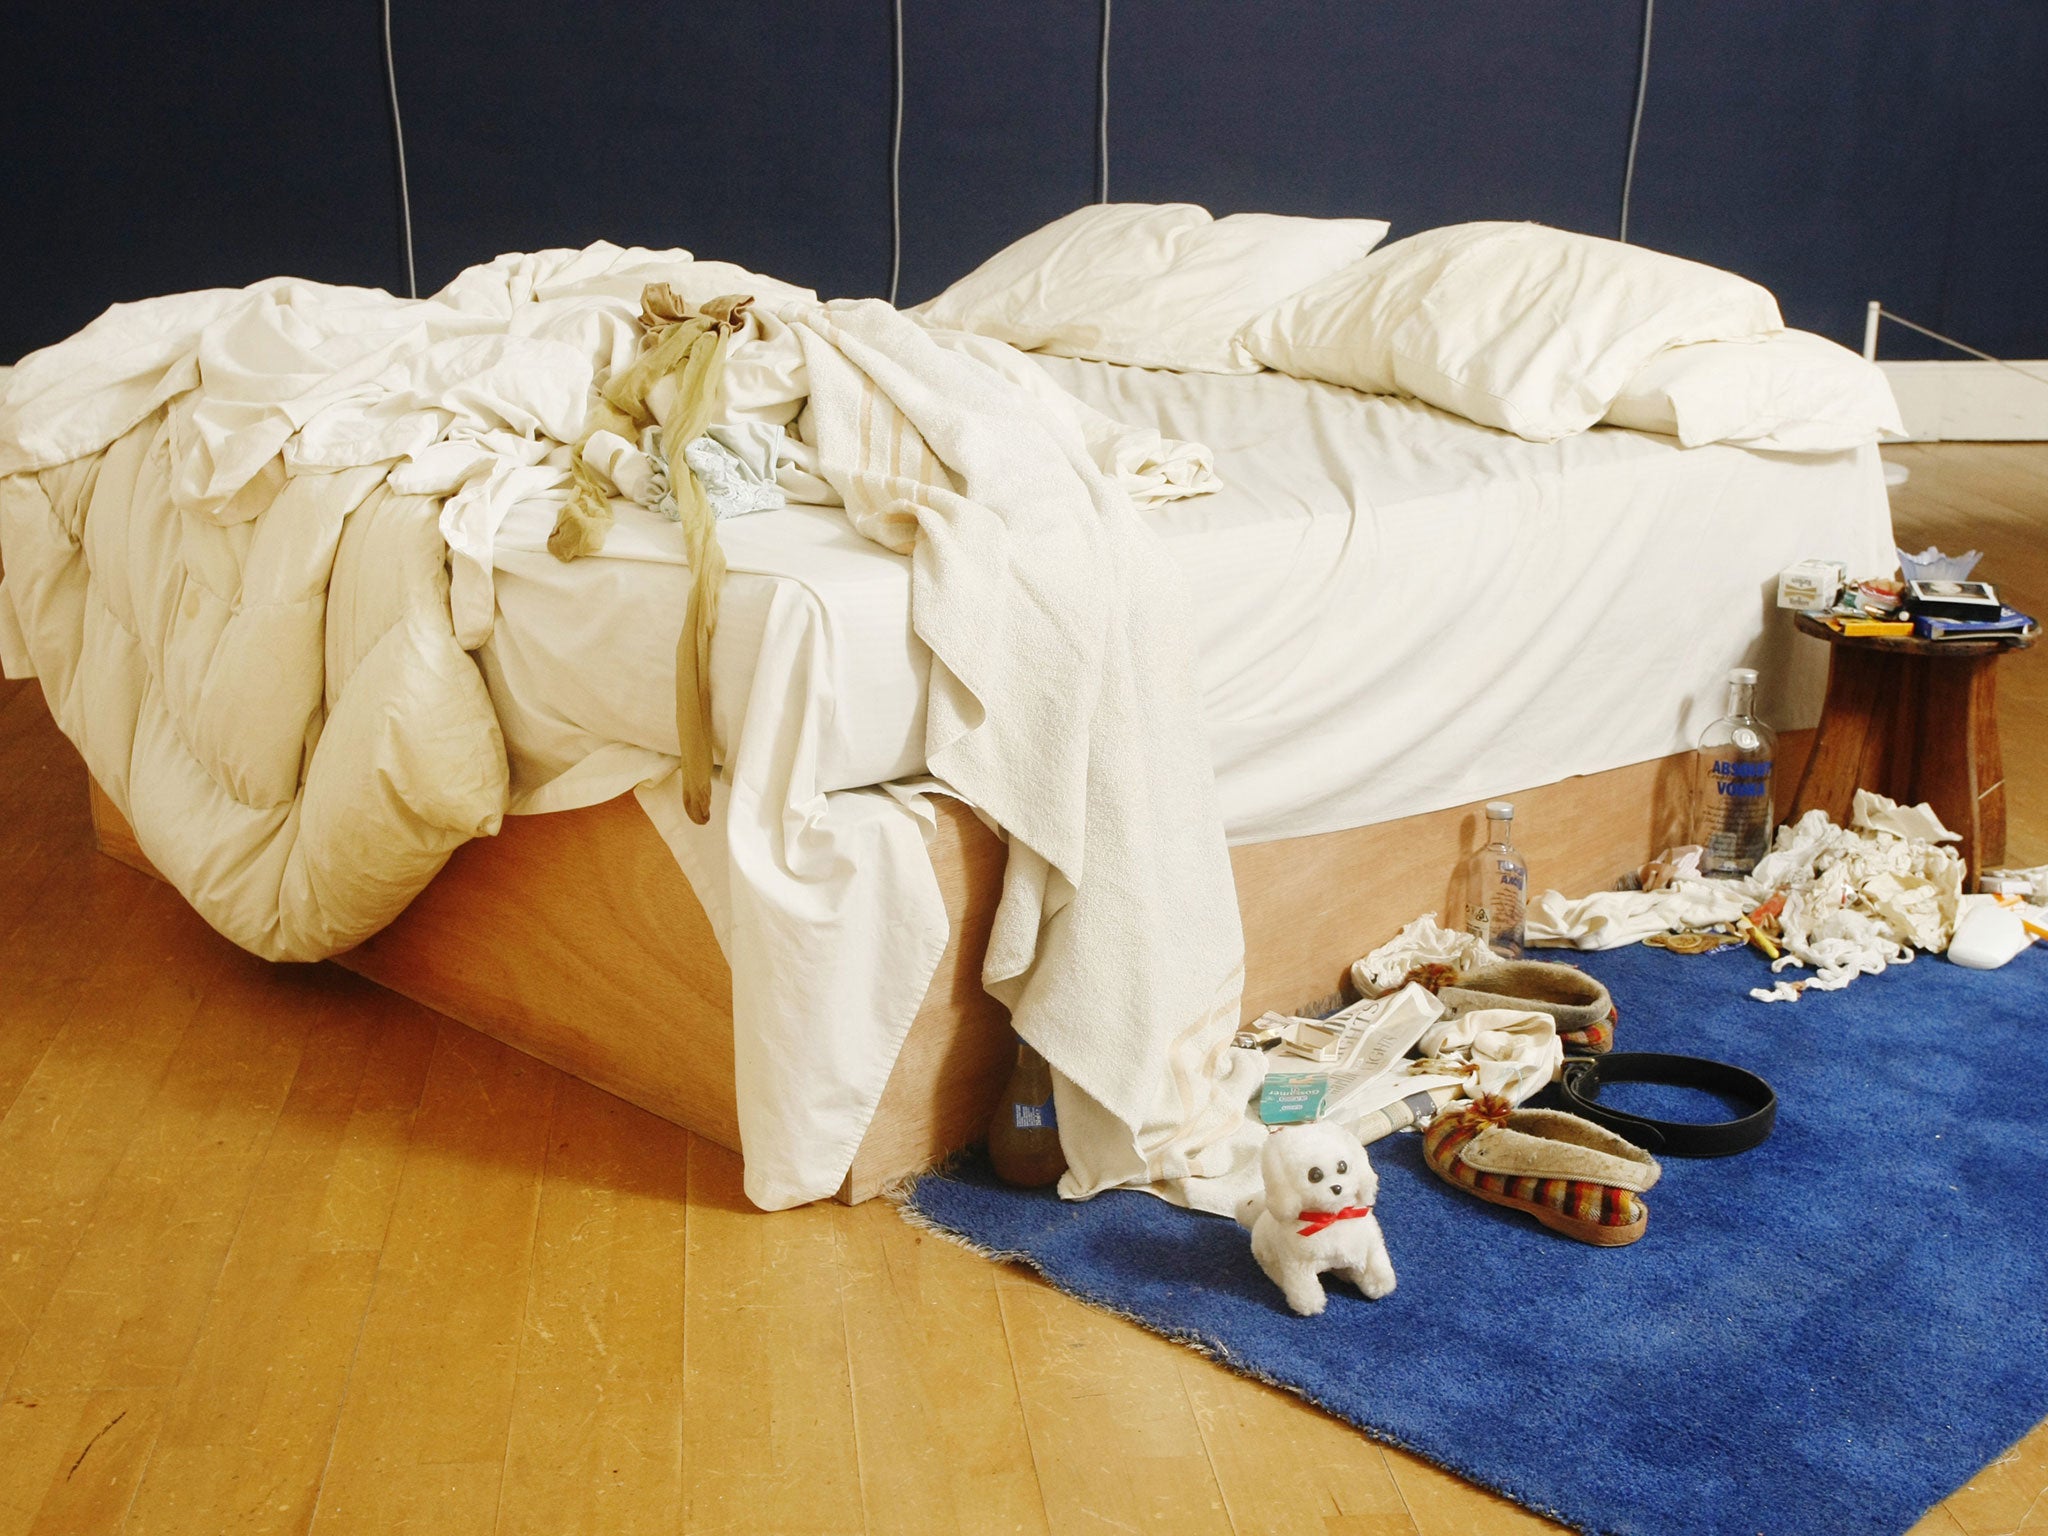 Tracy Emin's 'My Bed' was initially sold to Charles Saatchi for a reported £150,000